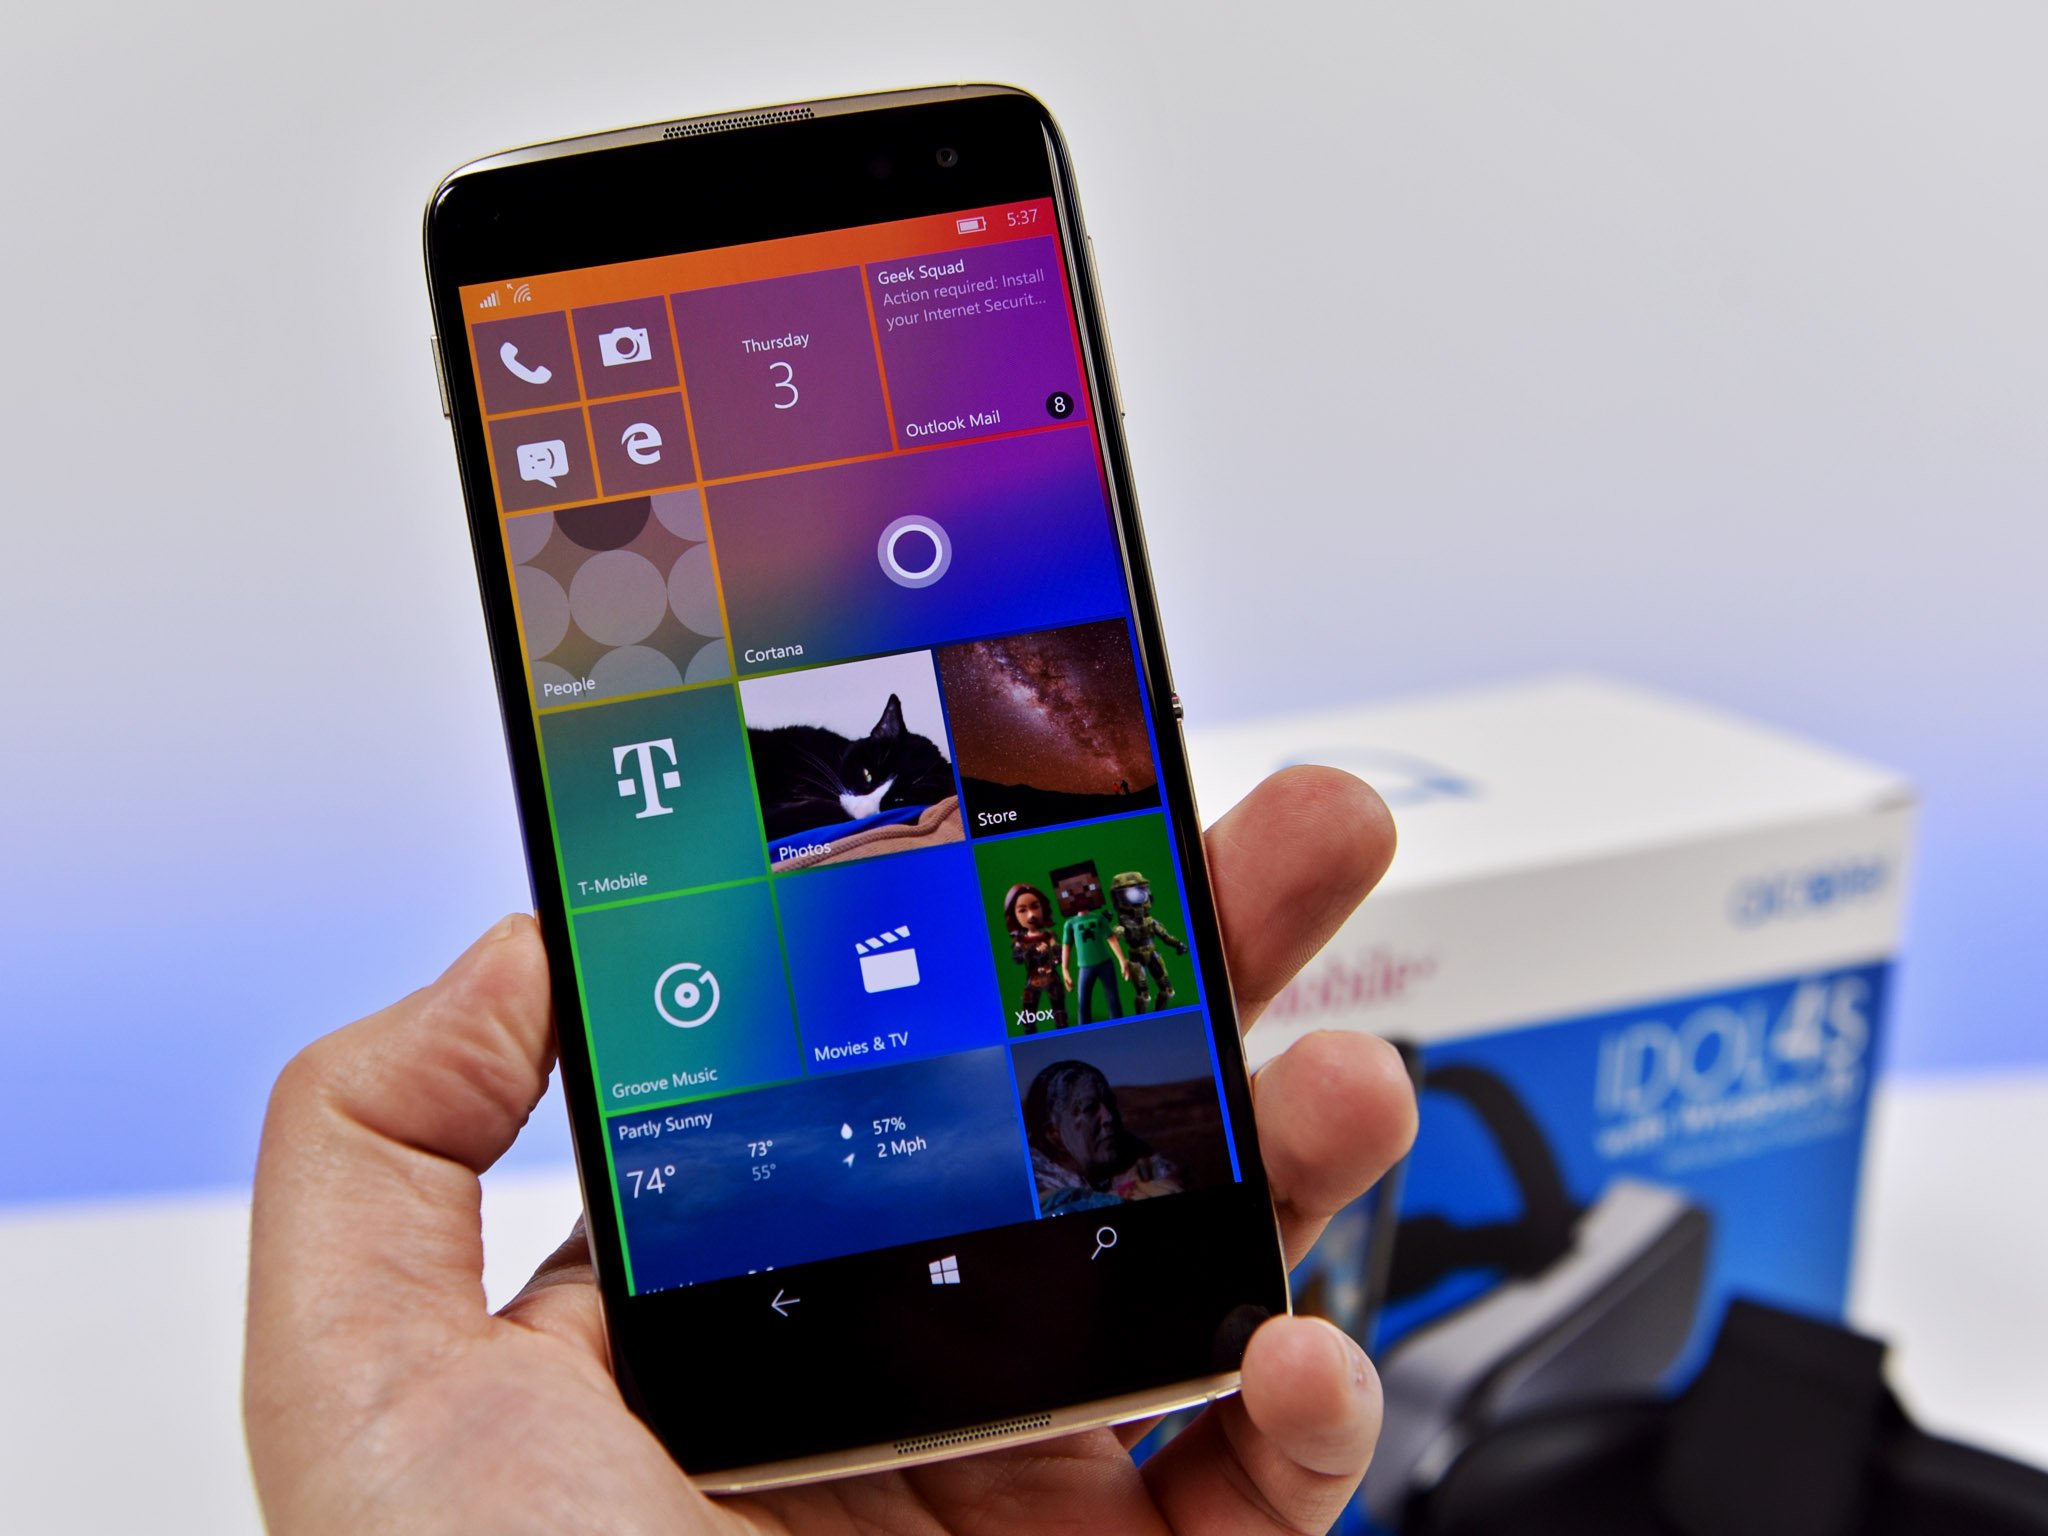 Mirror's Edge (Xbox Live) review - All About Windows Phone